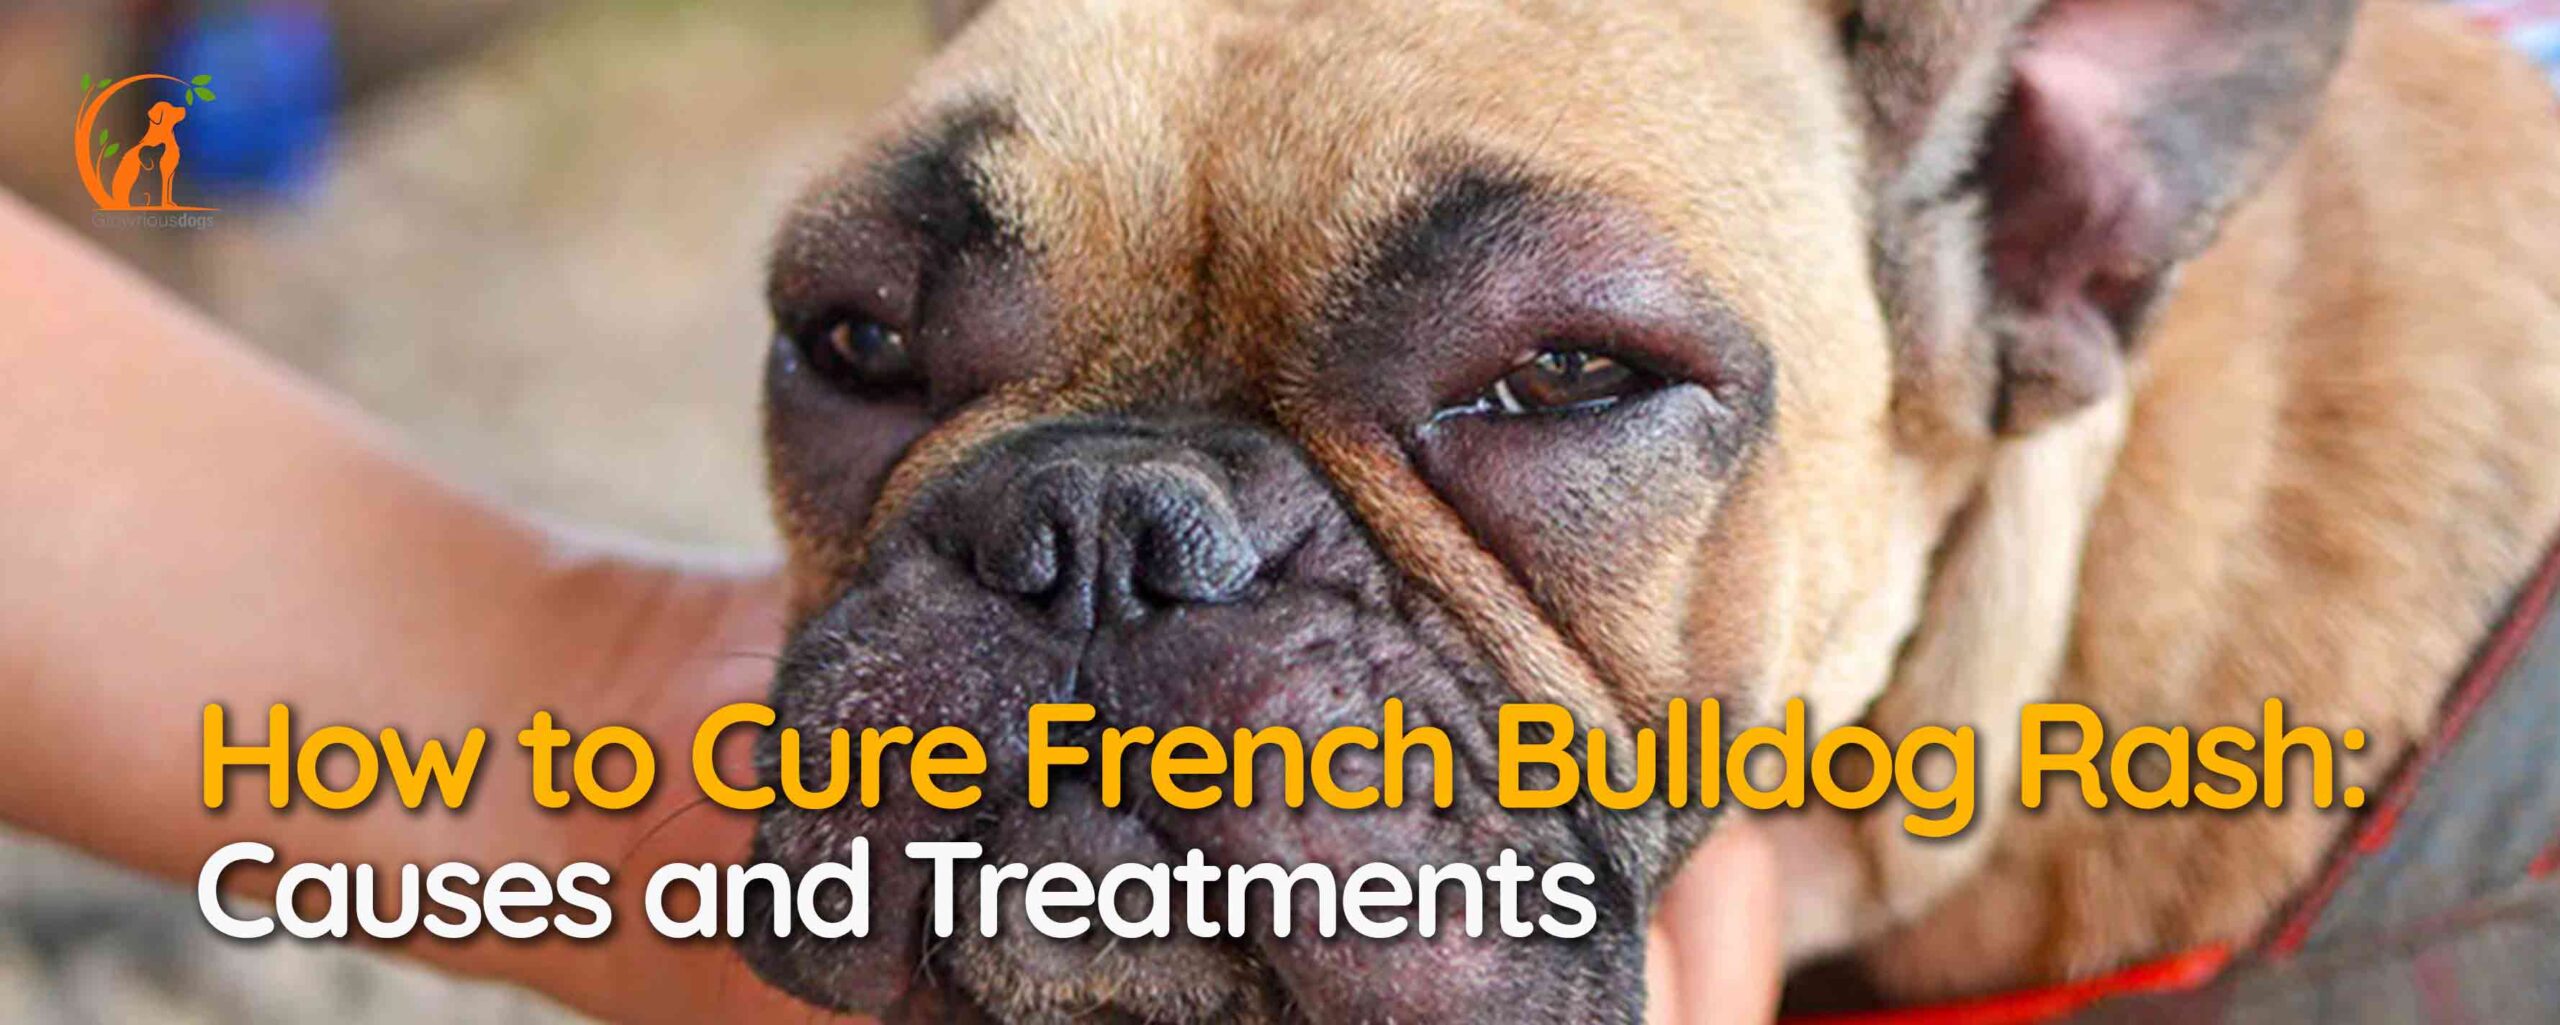 How to Cure French Bulldog Rash: Causes and Treatments